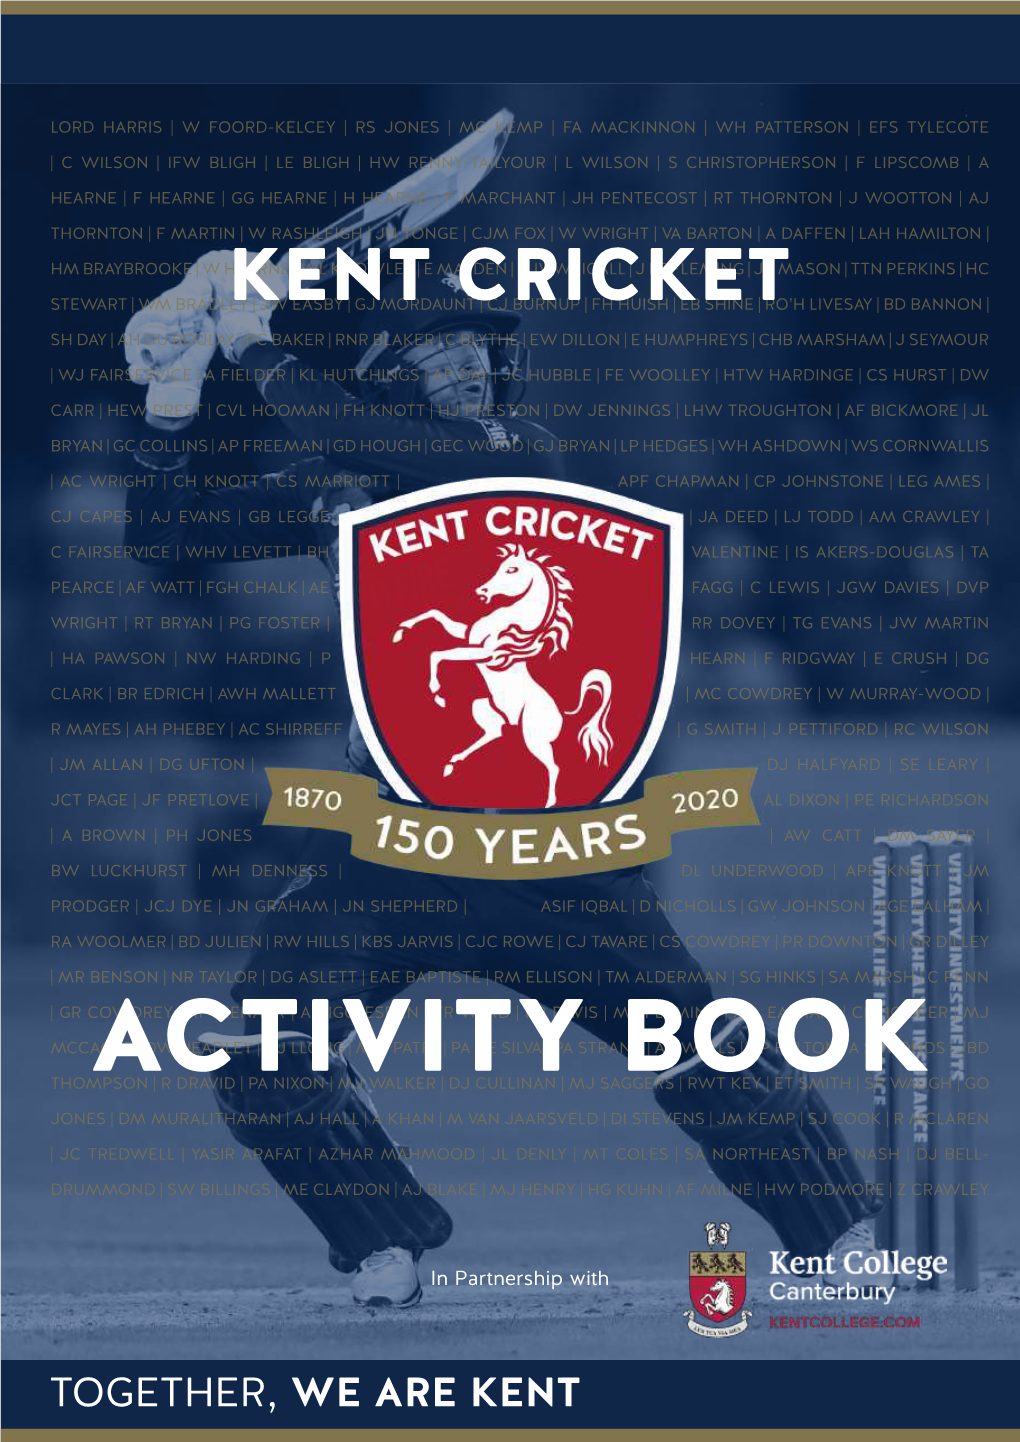 Download Your FREE Kent Cricket Activity Book